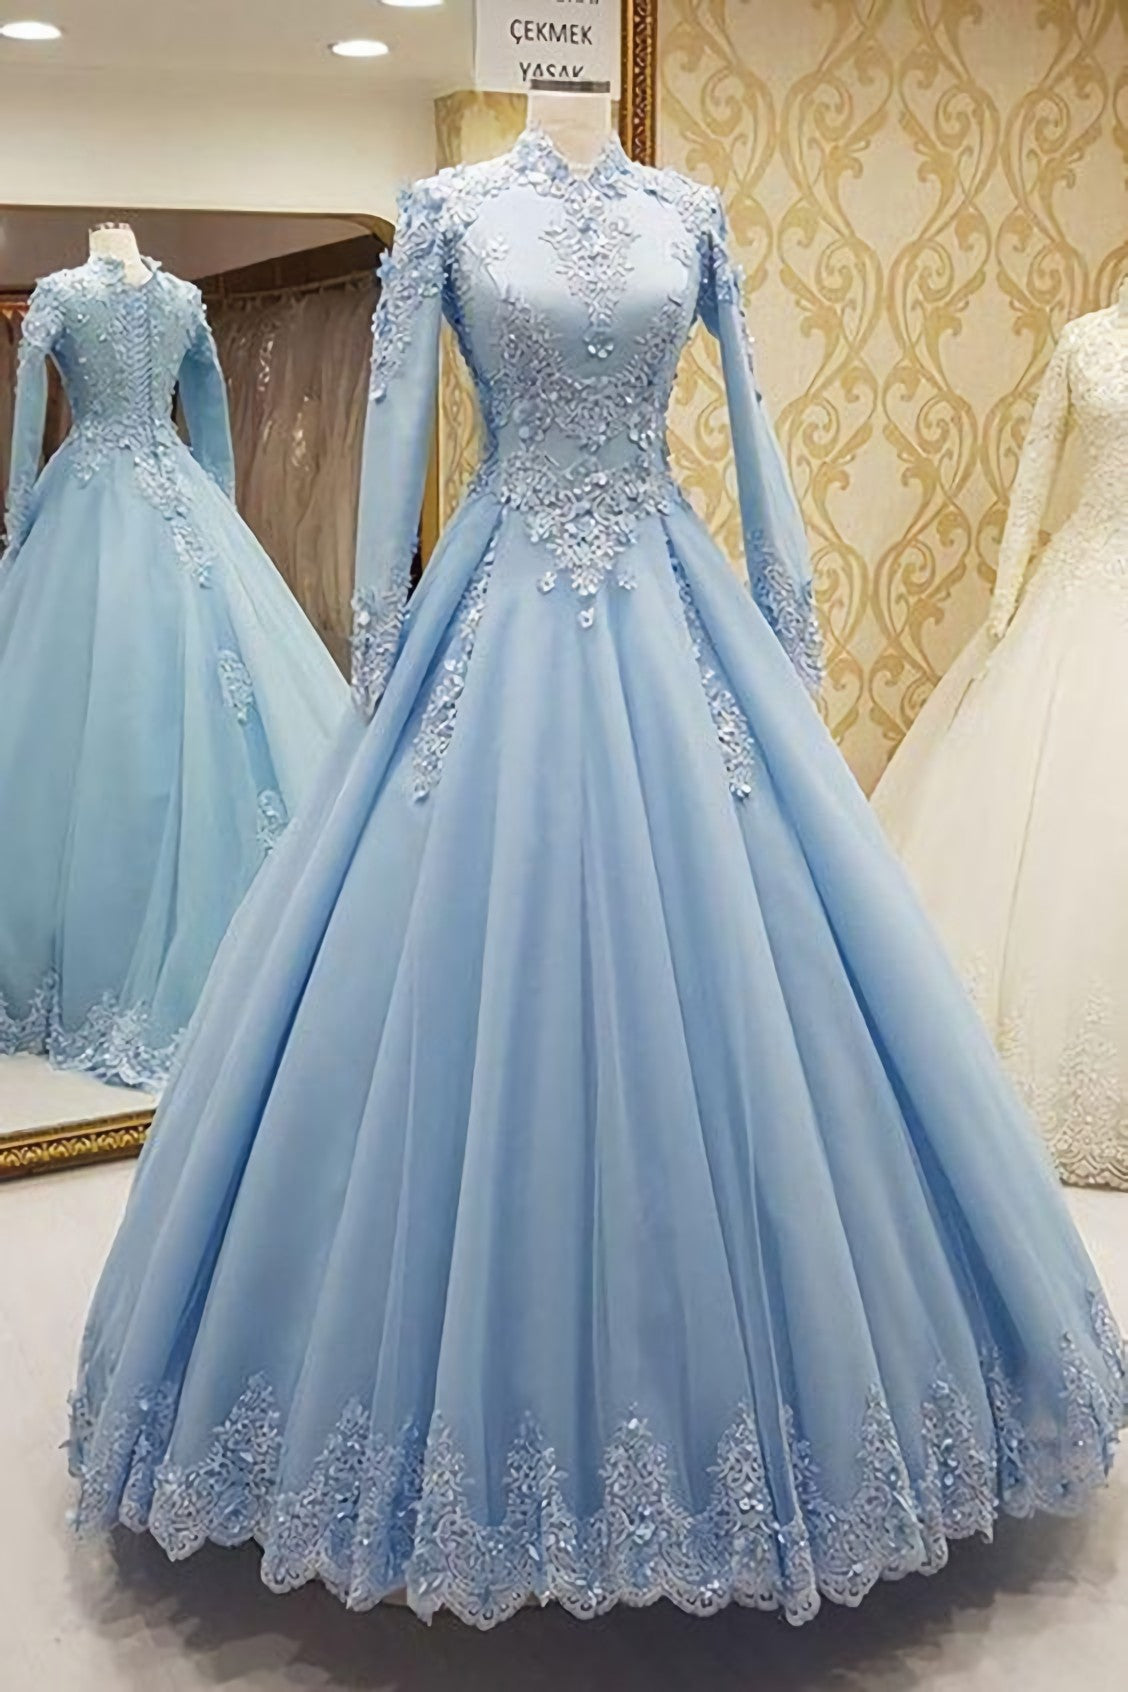 Blue Tulle High Neck Customize Formal Evening Dress, With Long Sleeves